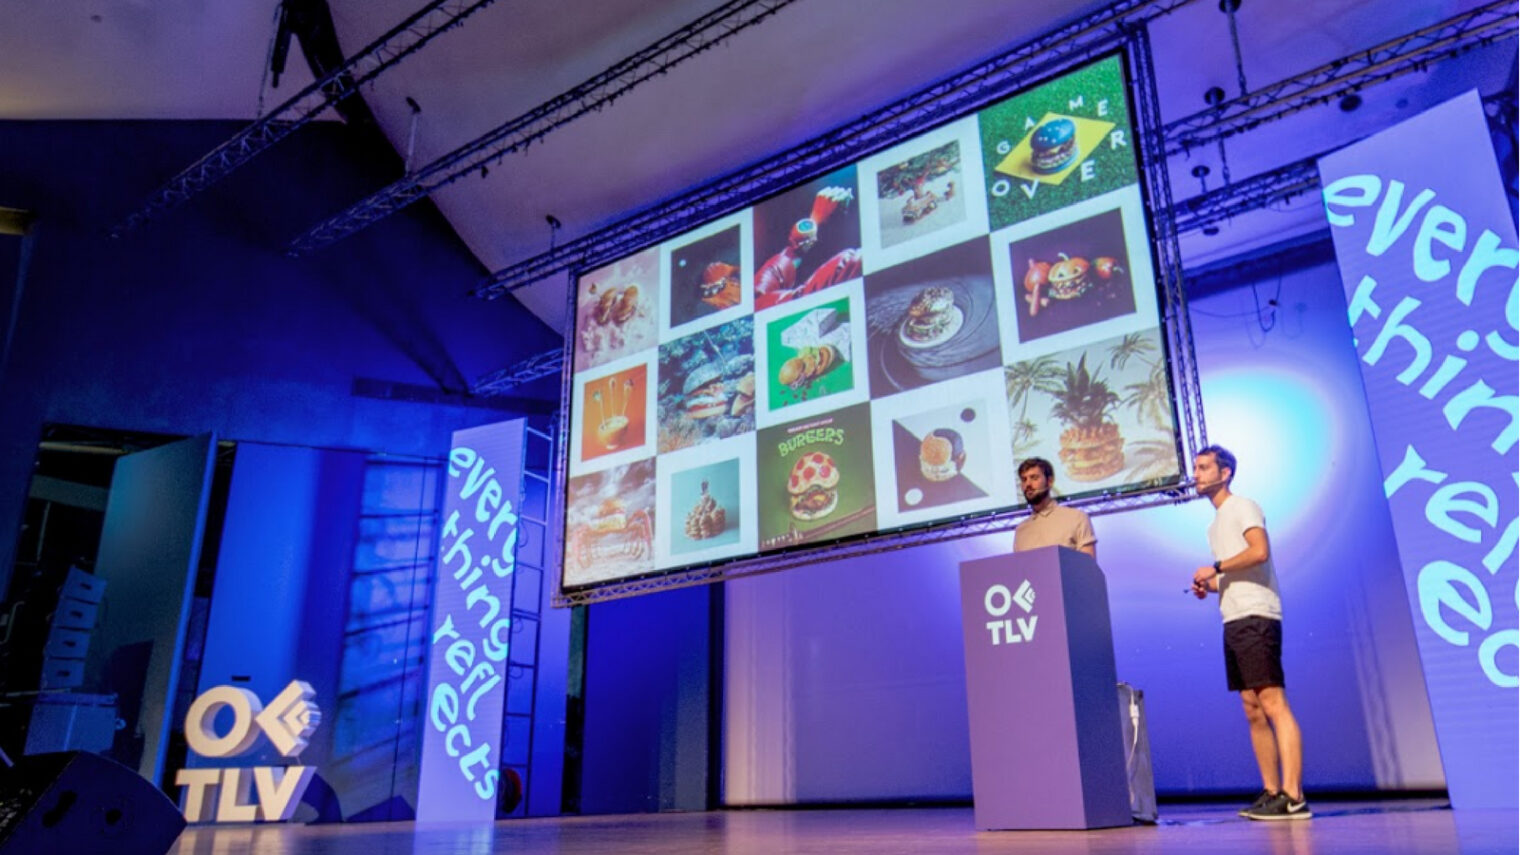 OFFF Tel Aviv will take place on October 14-15, 2018 at the Tel Aviv Museum of Art. Photo courtesy